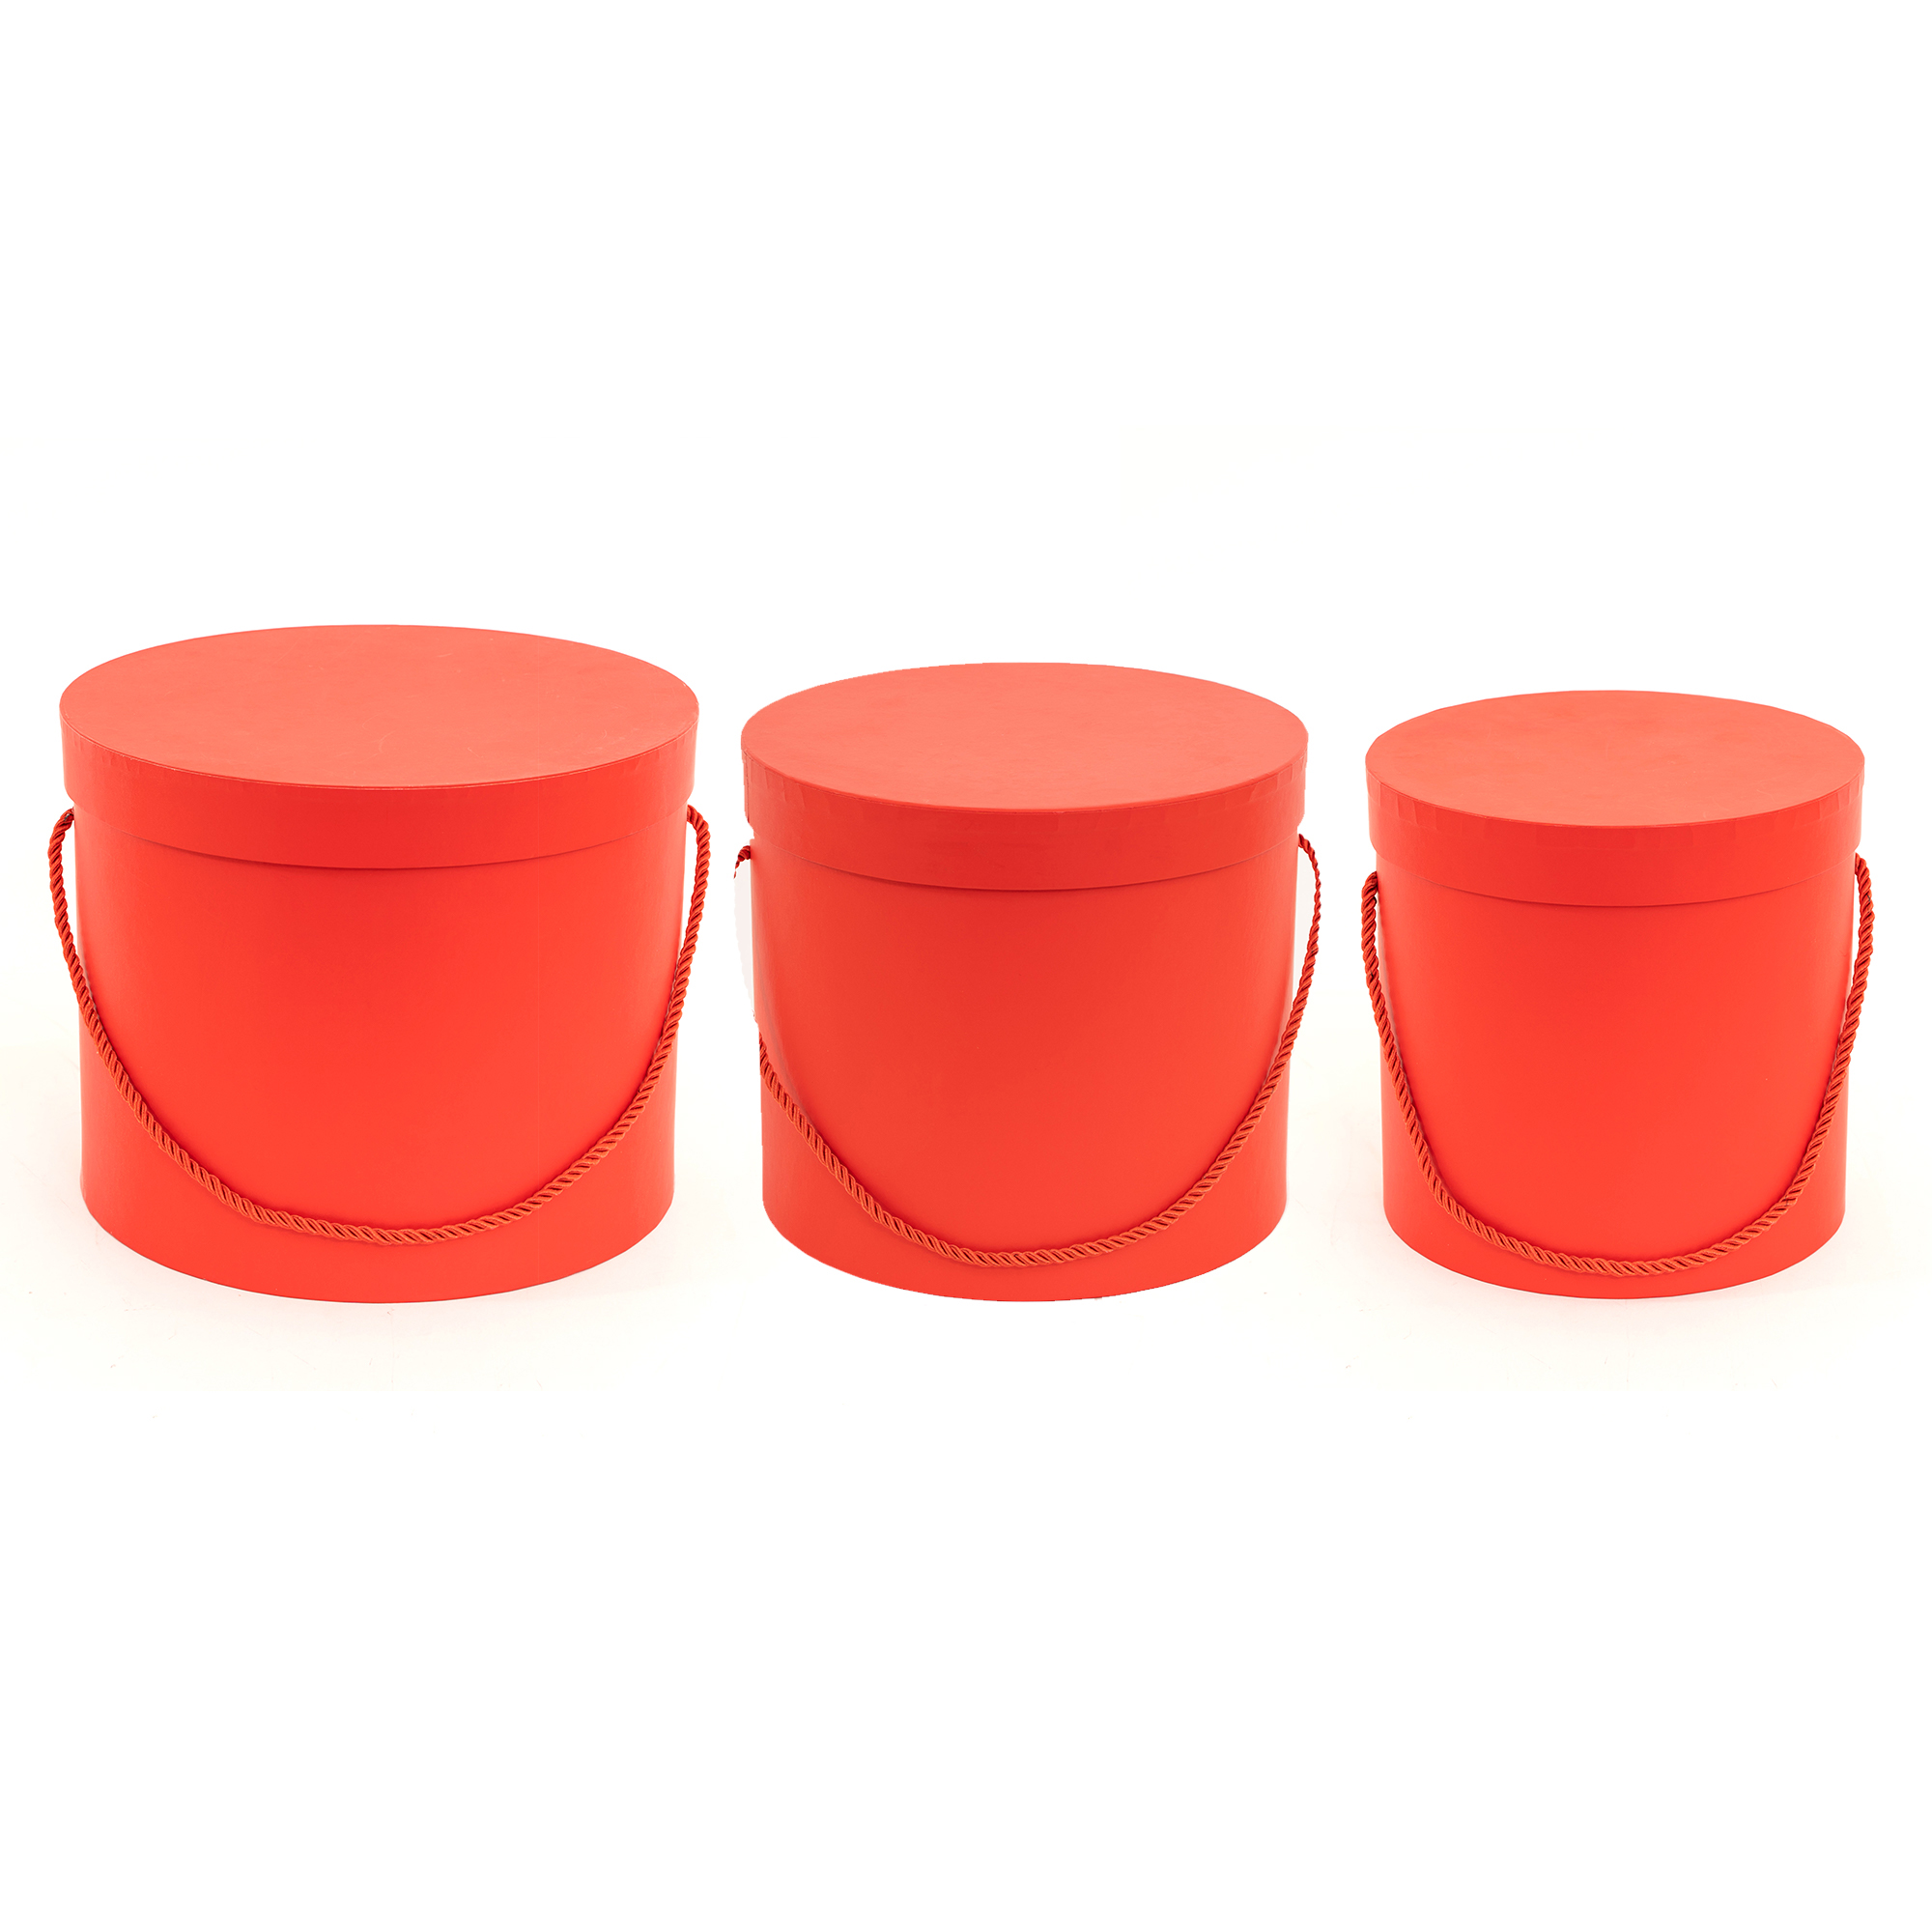 Nested Floral Boxes 3pc/set - All Red